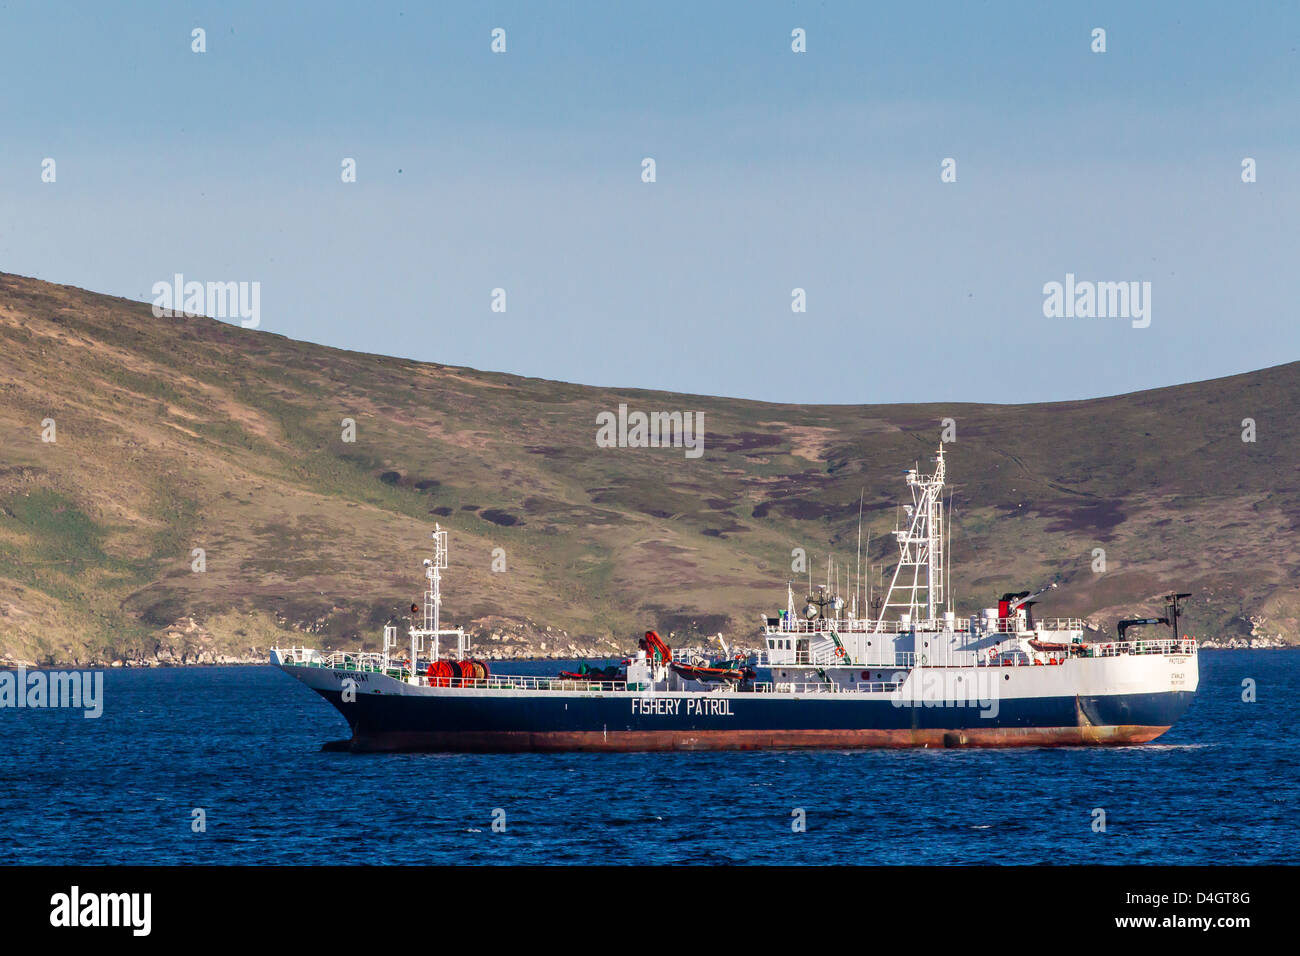 Fishery Patrol ship in the port of Stanley, East Falkland Island, South Atlantic Ocean, South America Stock Photo